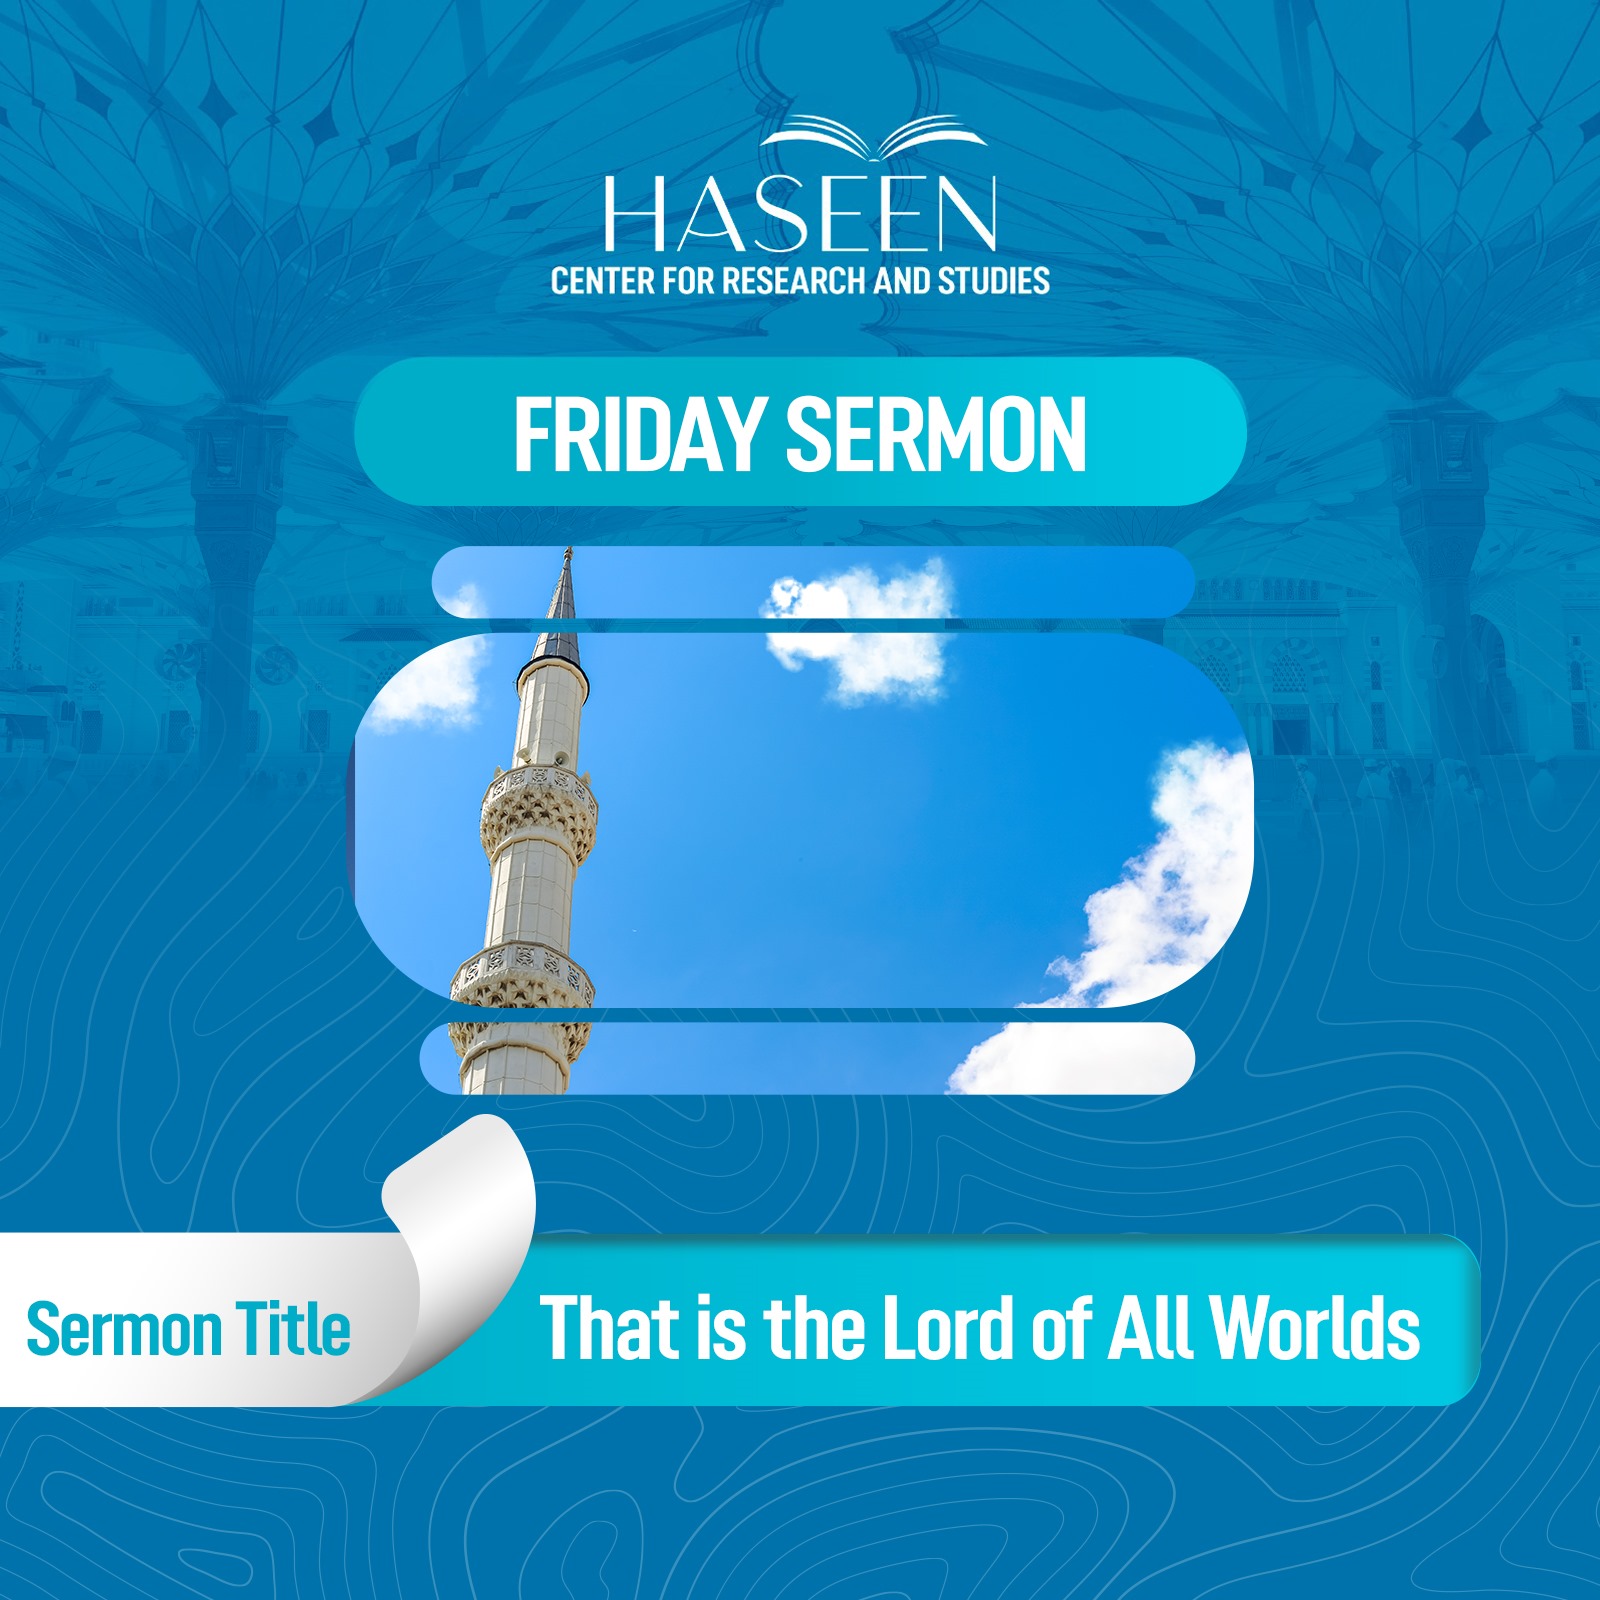 Title of the Sermon: That is the Lord of All Worlds